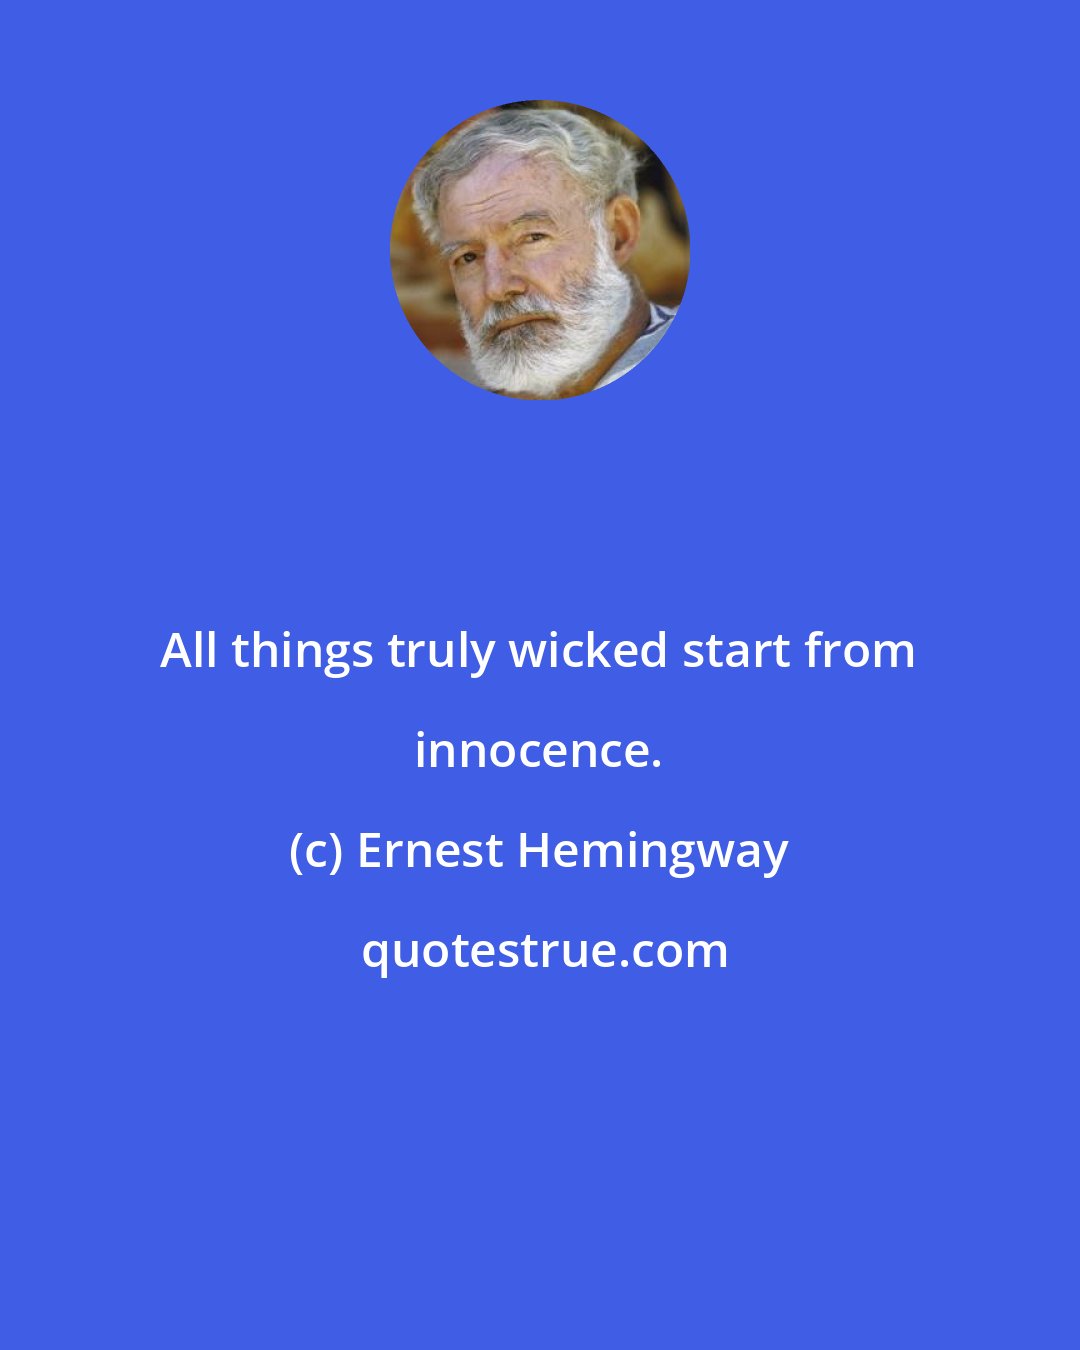 Ernest Hemingway: All things truly wicked start from innocence.